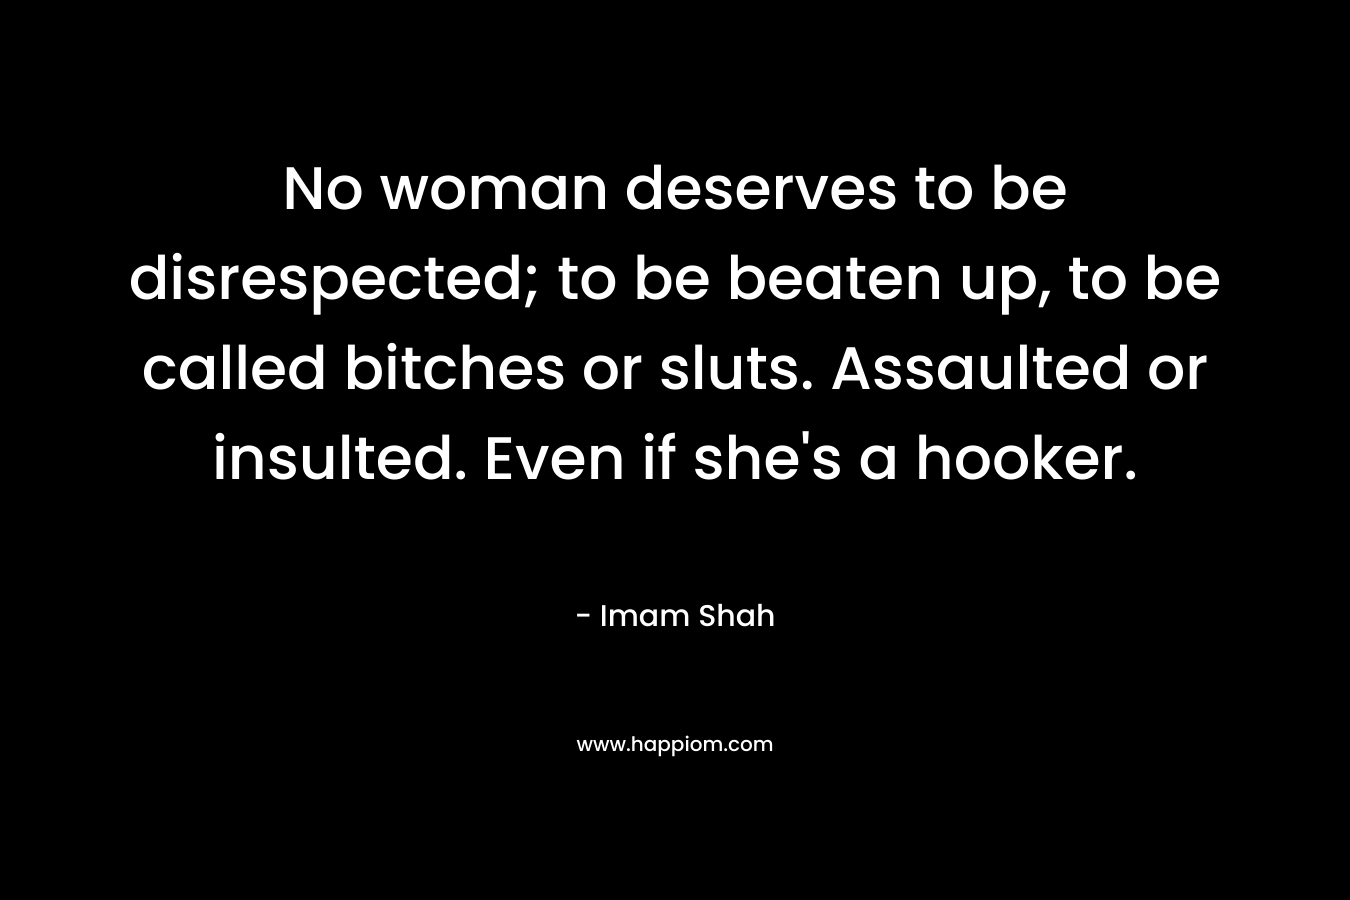 No woman deserves to be disrespected; to be beaten up, to be called bitches or sluts. Assaulted or insulted. Even if she’s a hooker. – Imam Shah